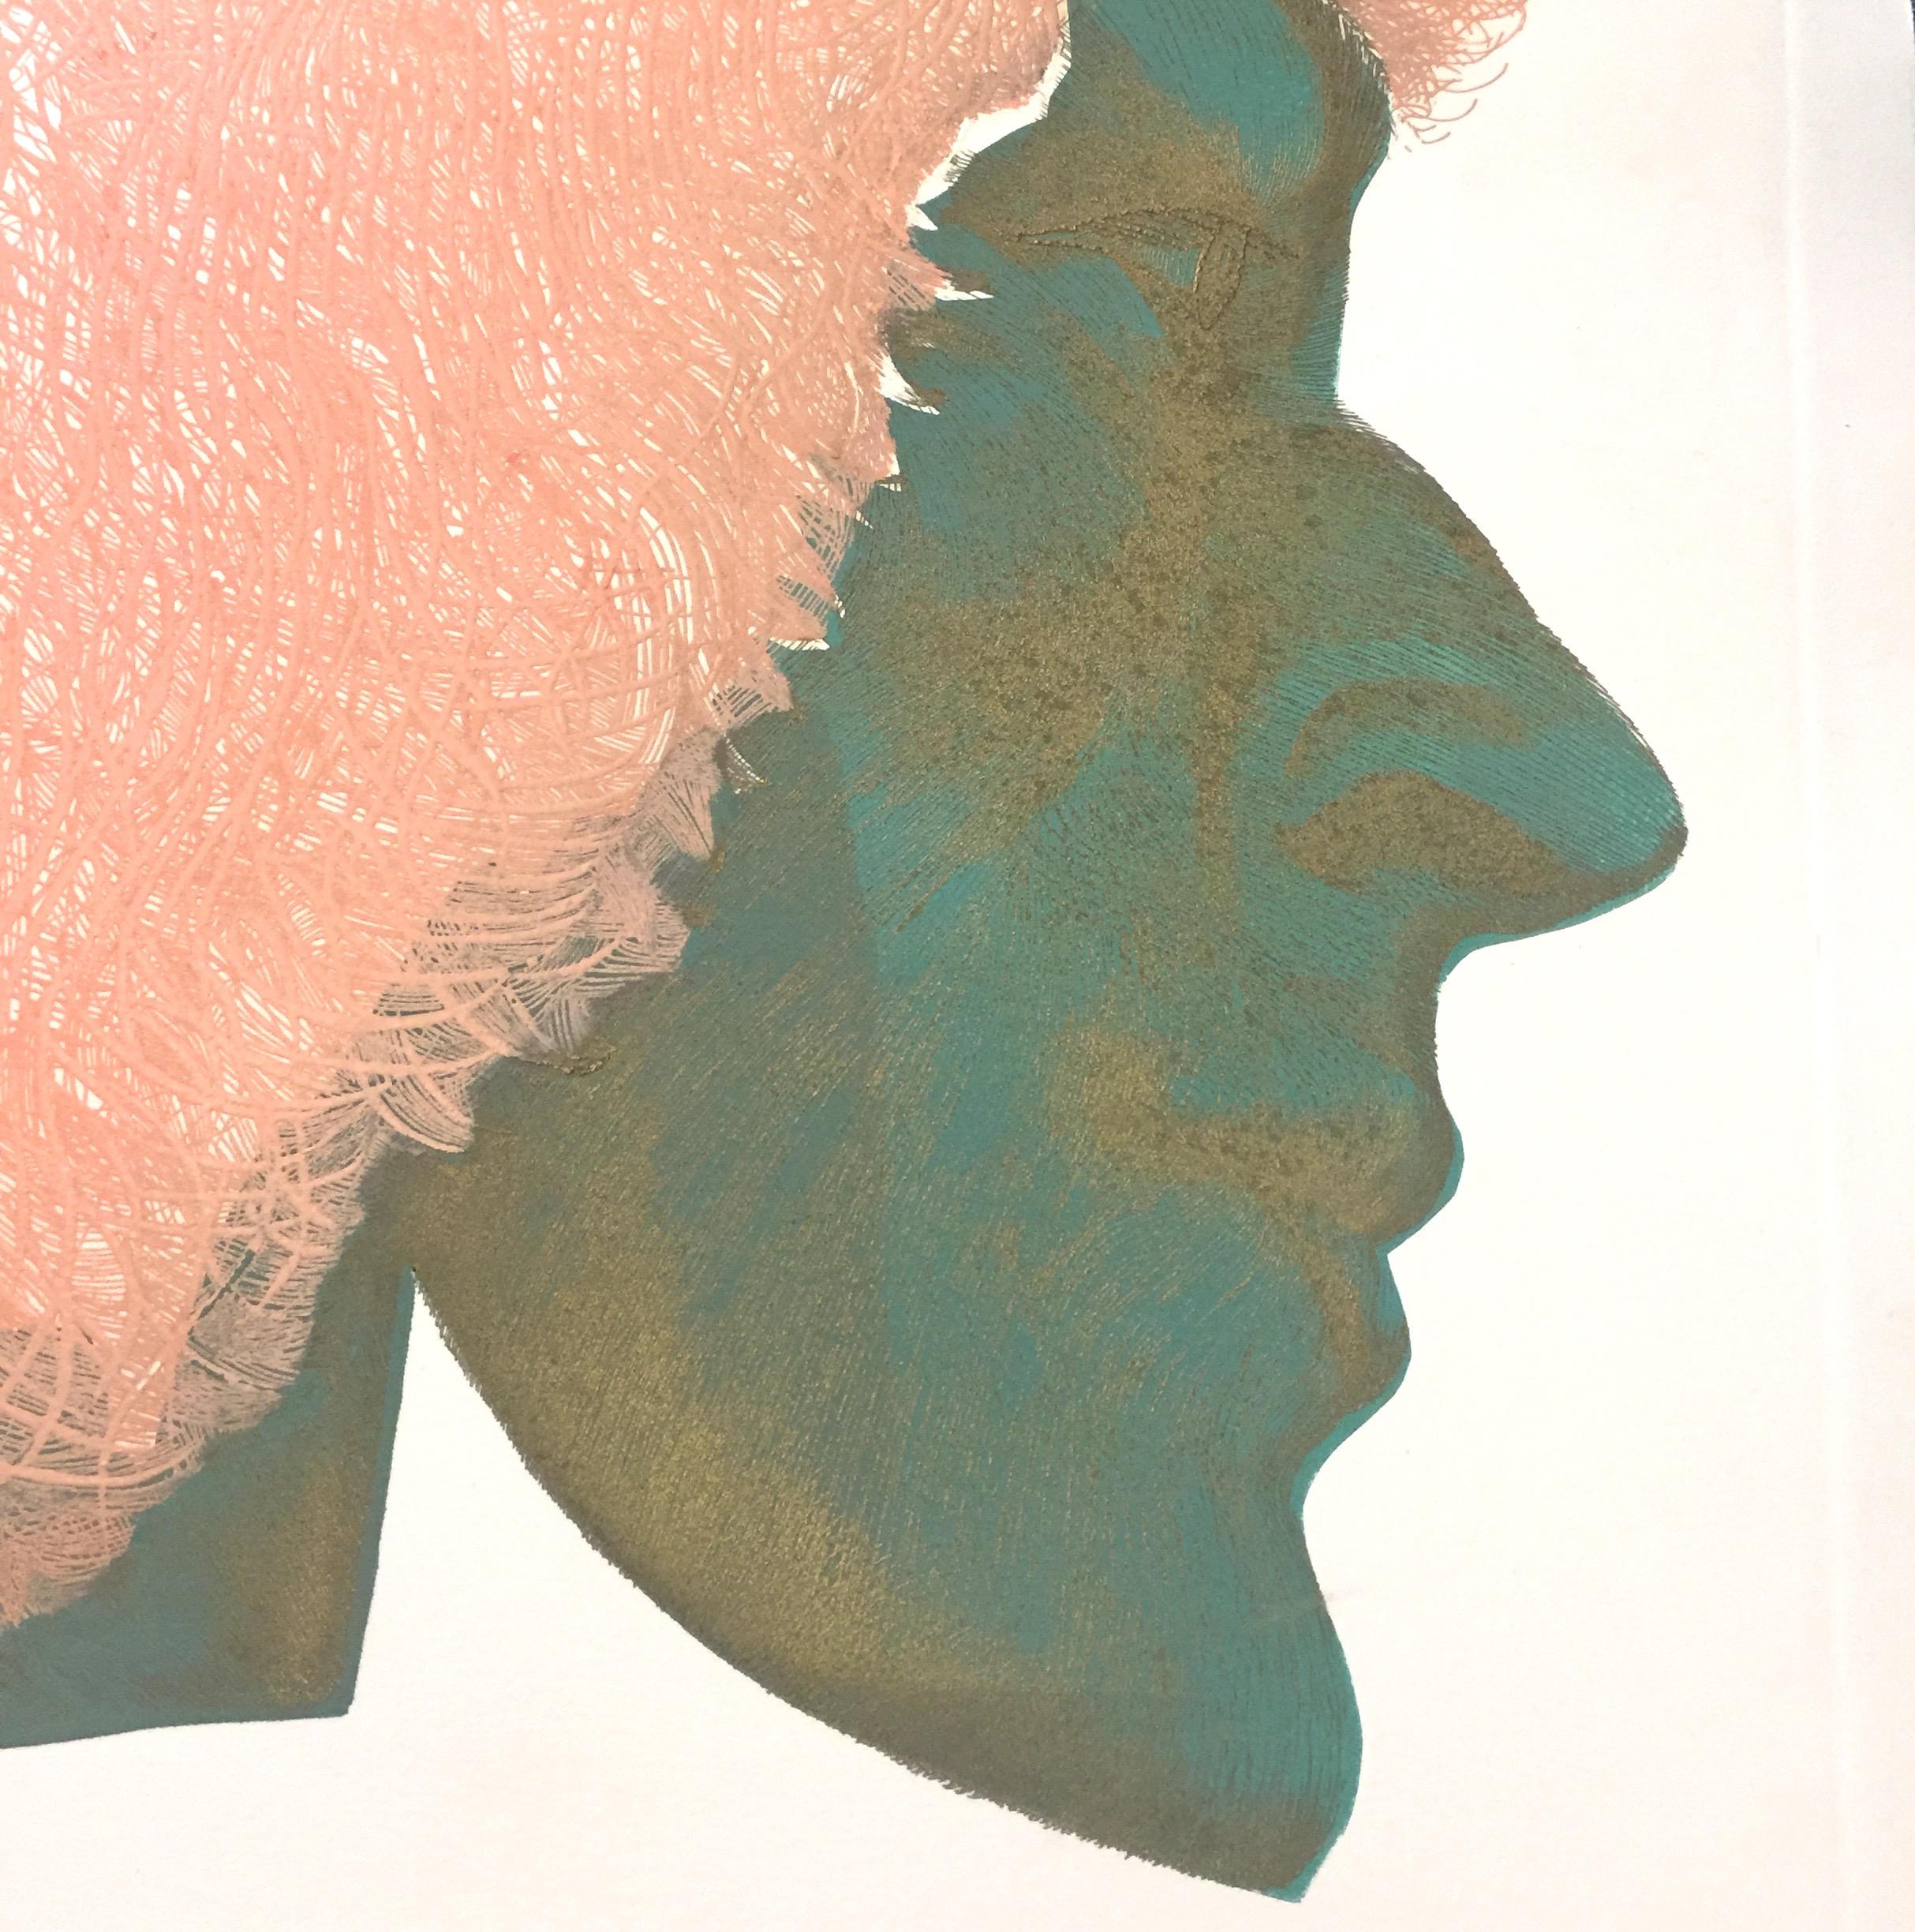 Profile in Pink and Green - Original Etching by Giacomo Porzano - 1972 1